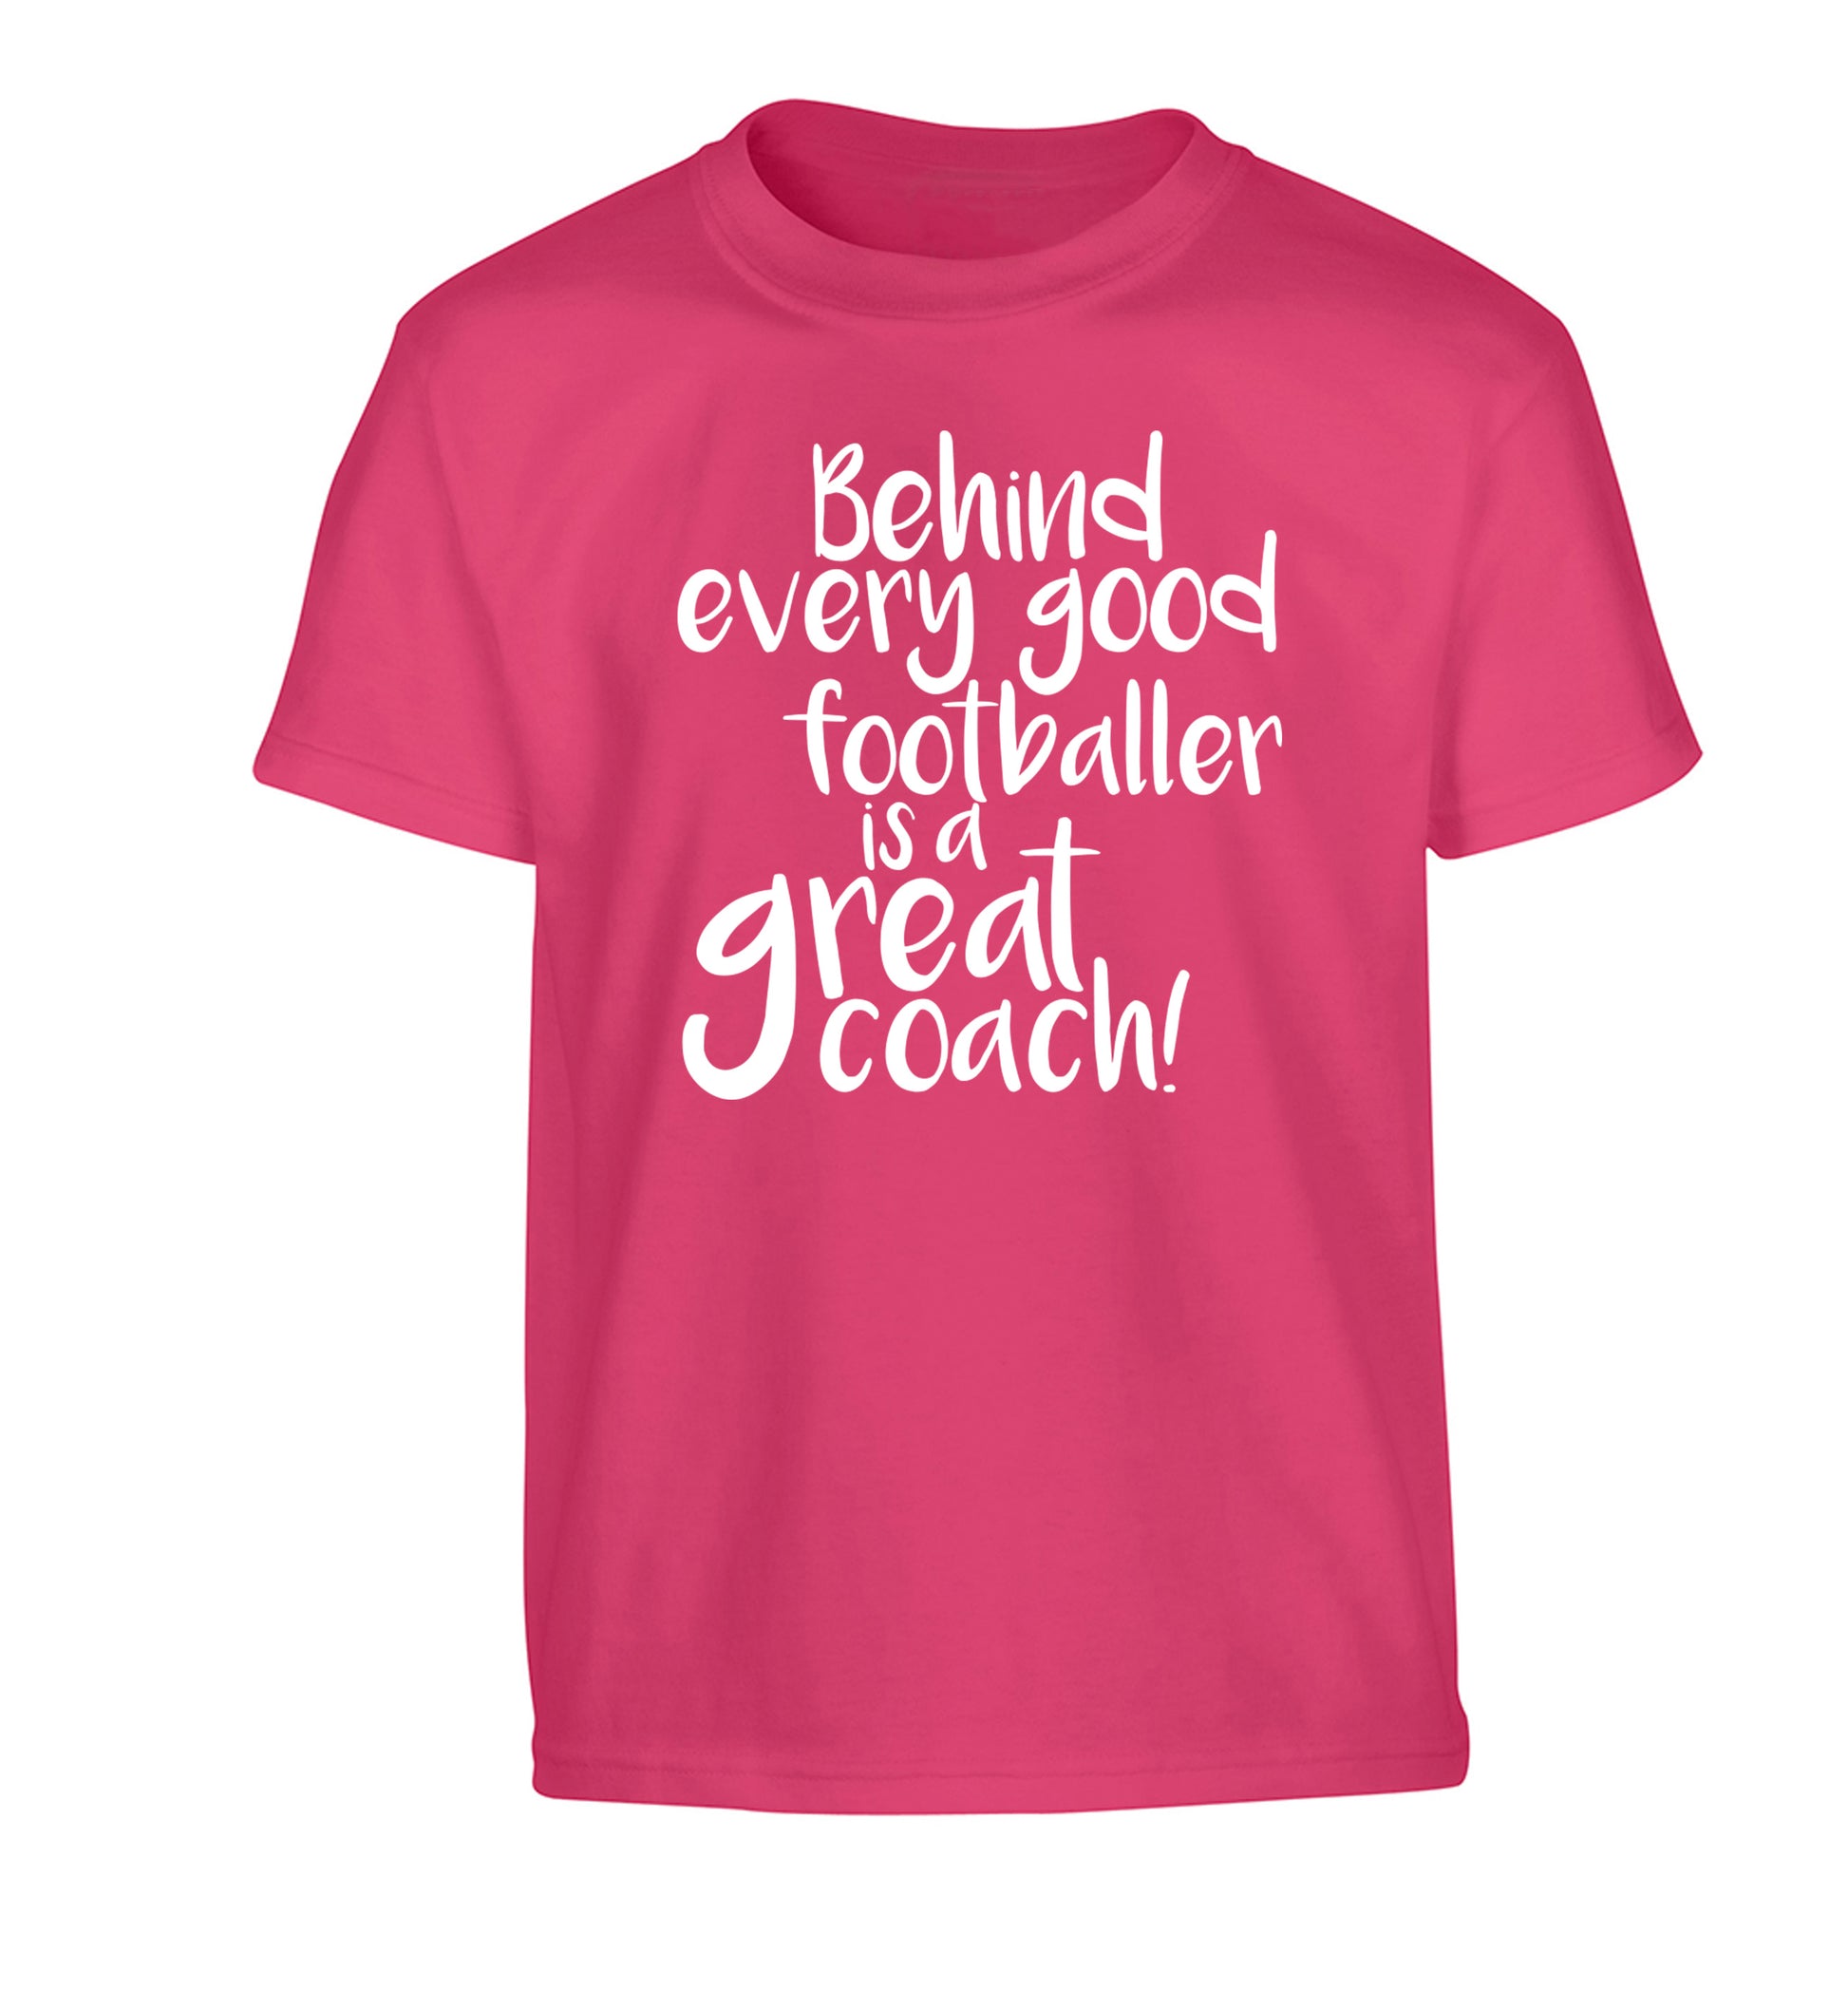 Behind every good footballer is a great coach! Children's pink Tshirt 12-14 Years